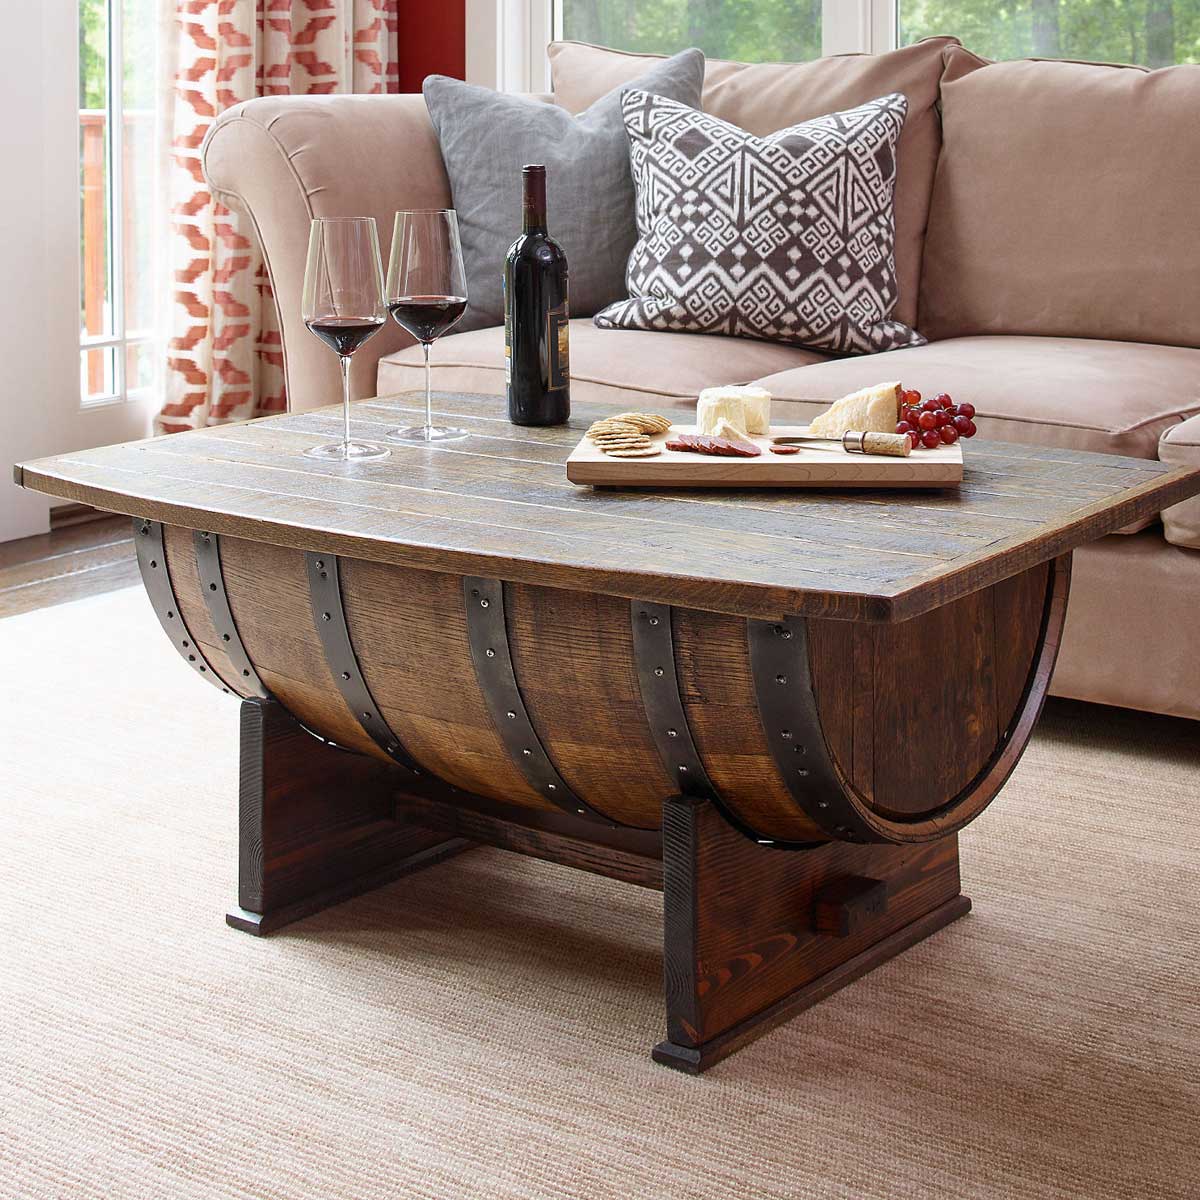 super cool homemade coffee table ideas unusual tables whiskeytable diy end whiskey barrel dog cage made wood metal gold bedside cabinets antique blue pulaski sofa vintage mirrored